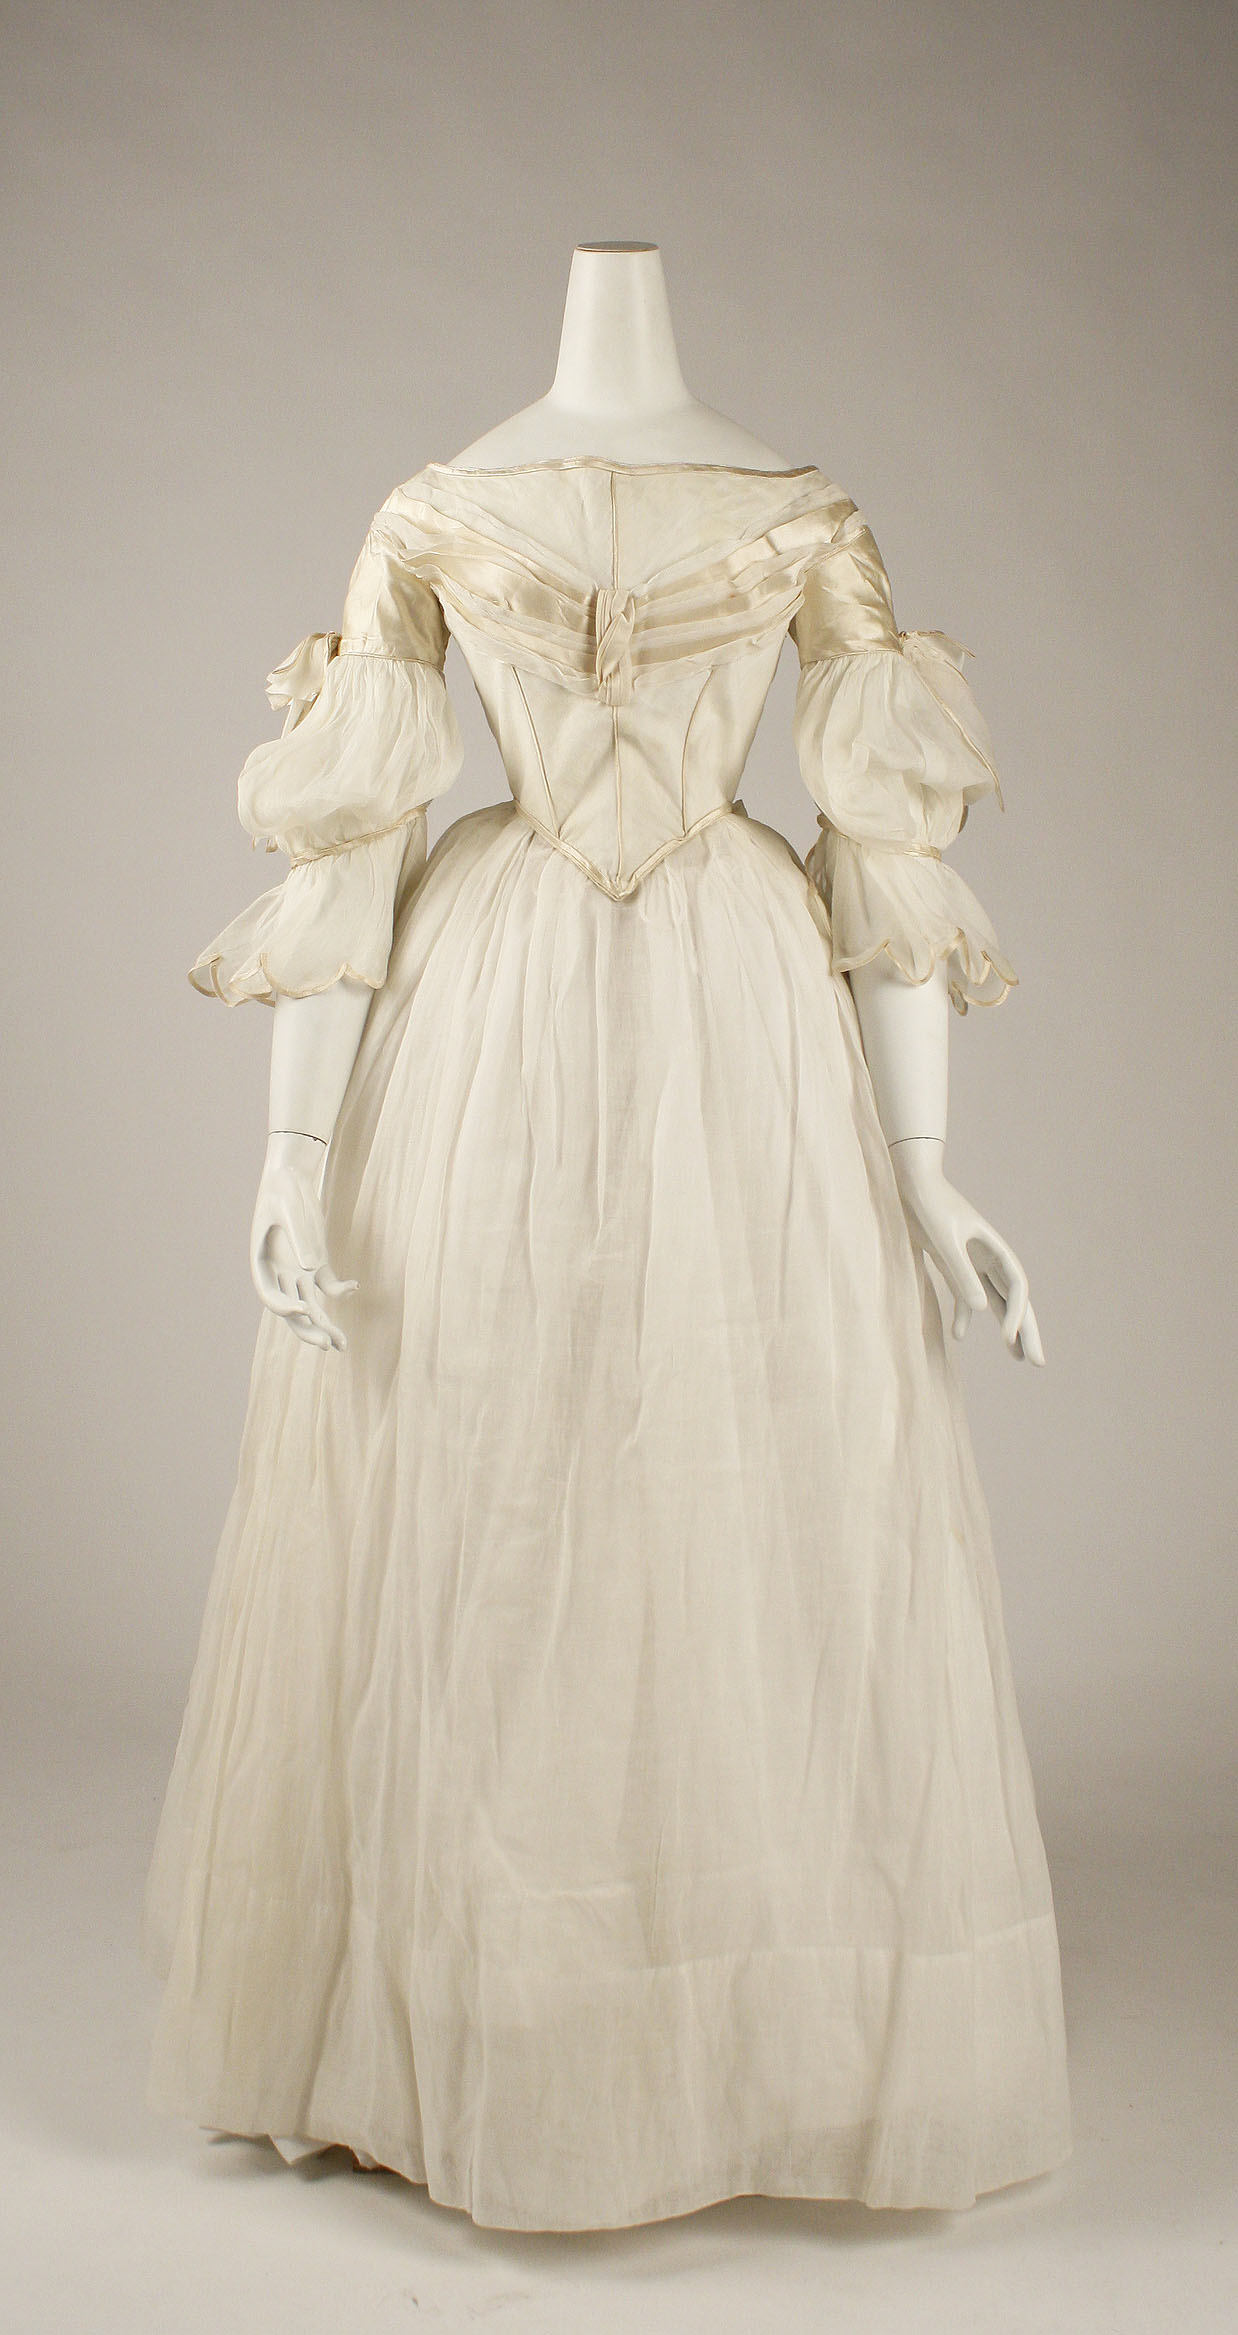 Rate the Dress: All white in the 1840s - The Dreamstress